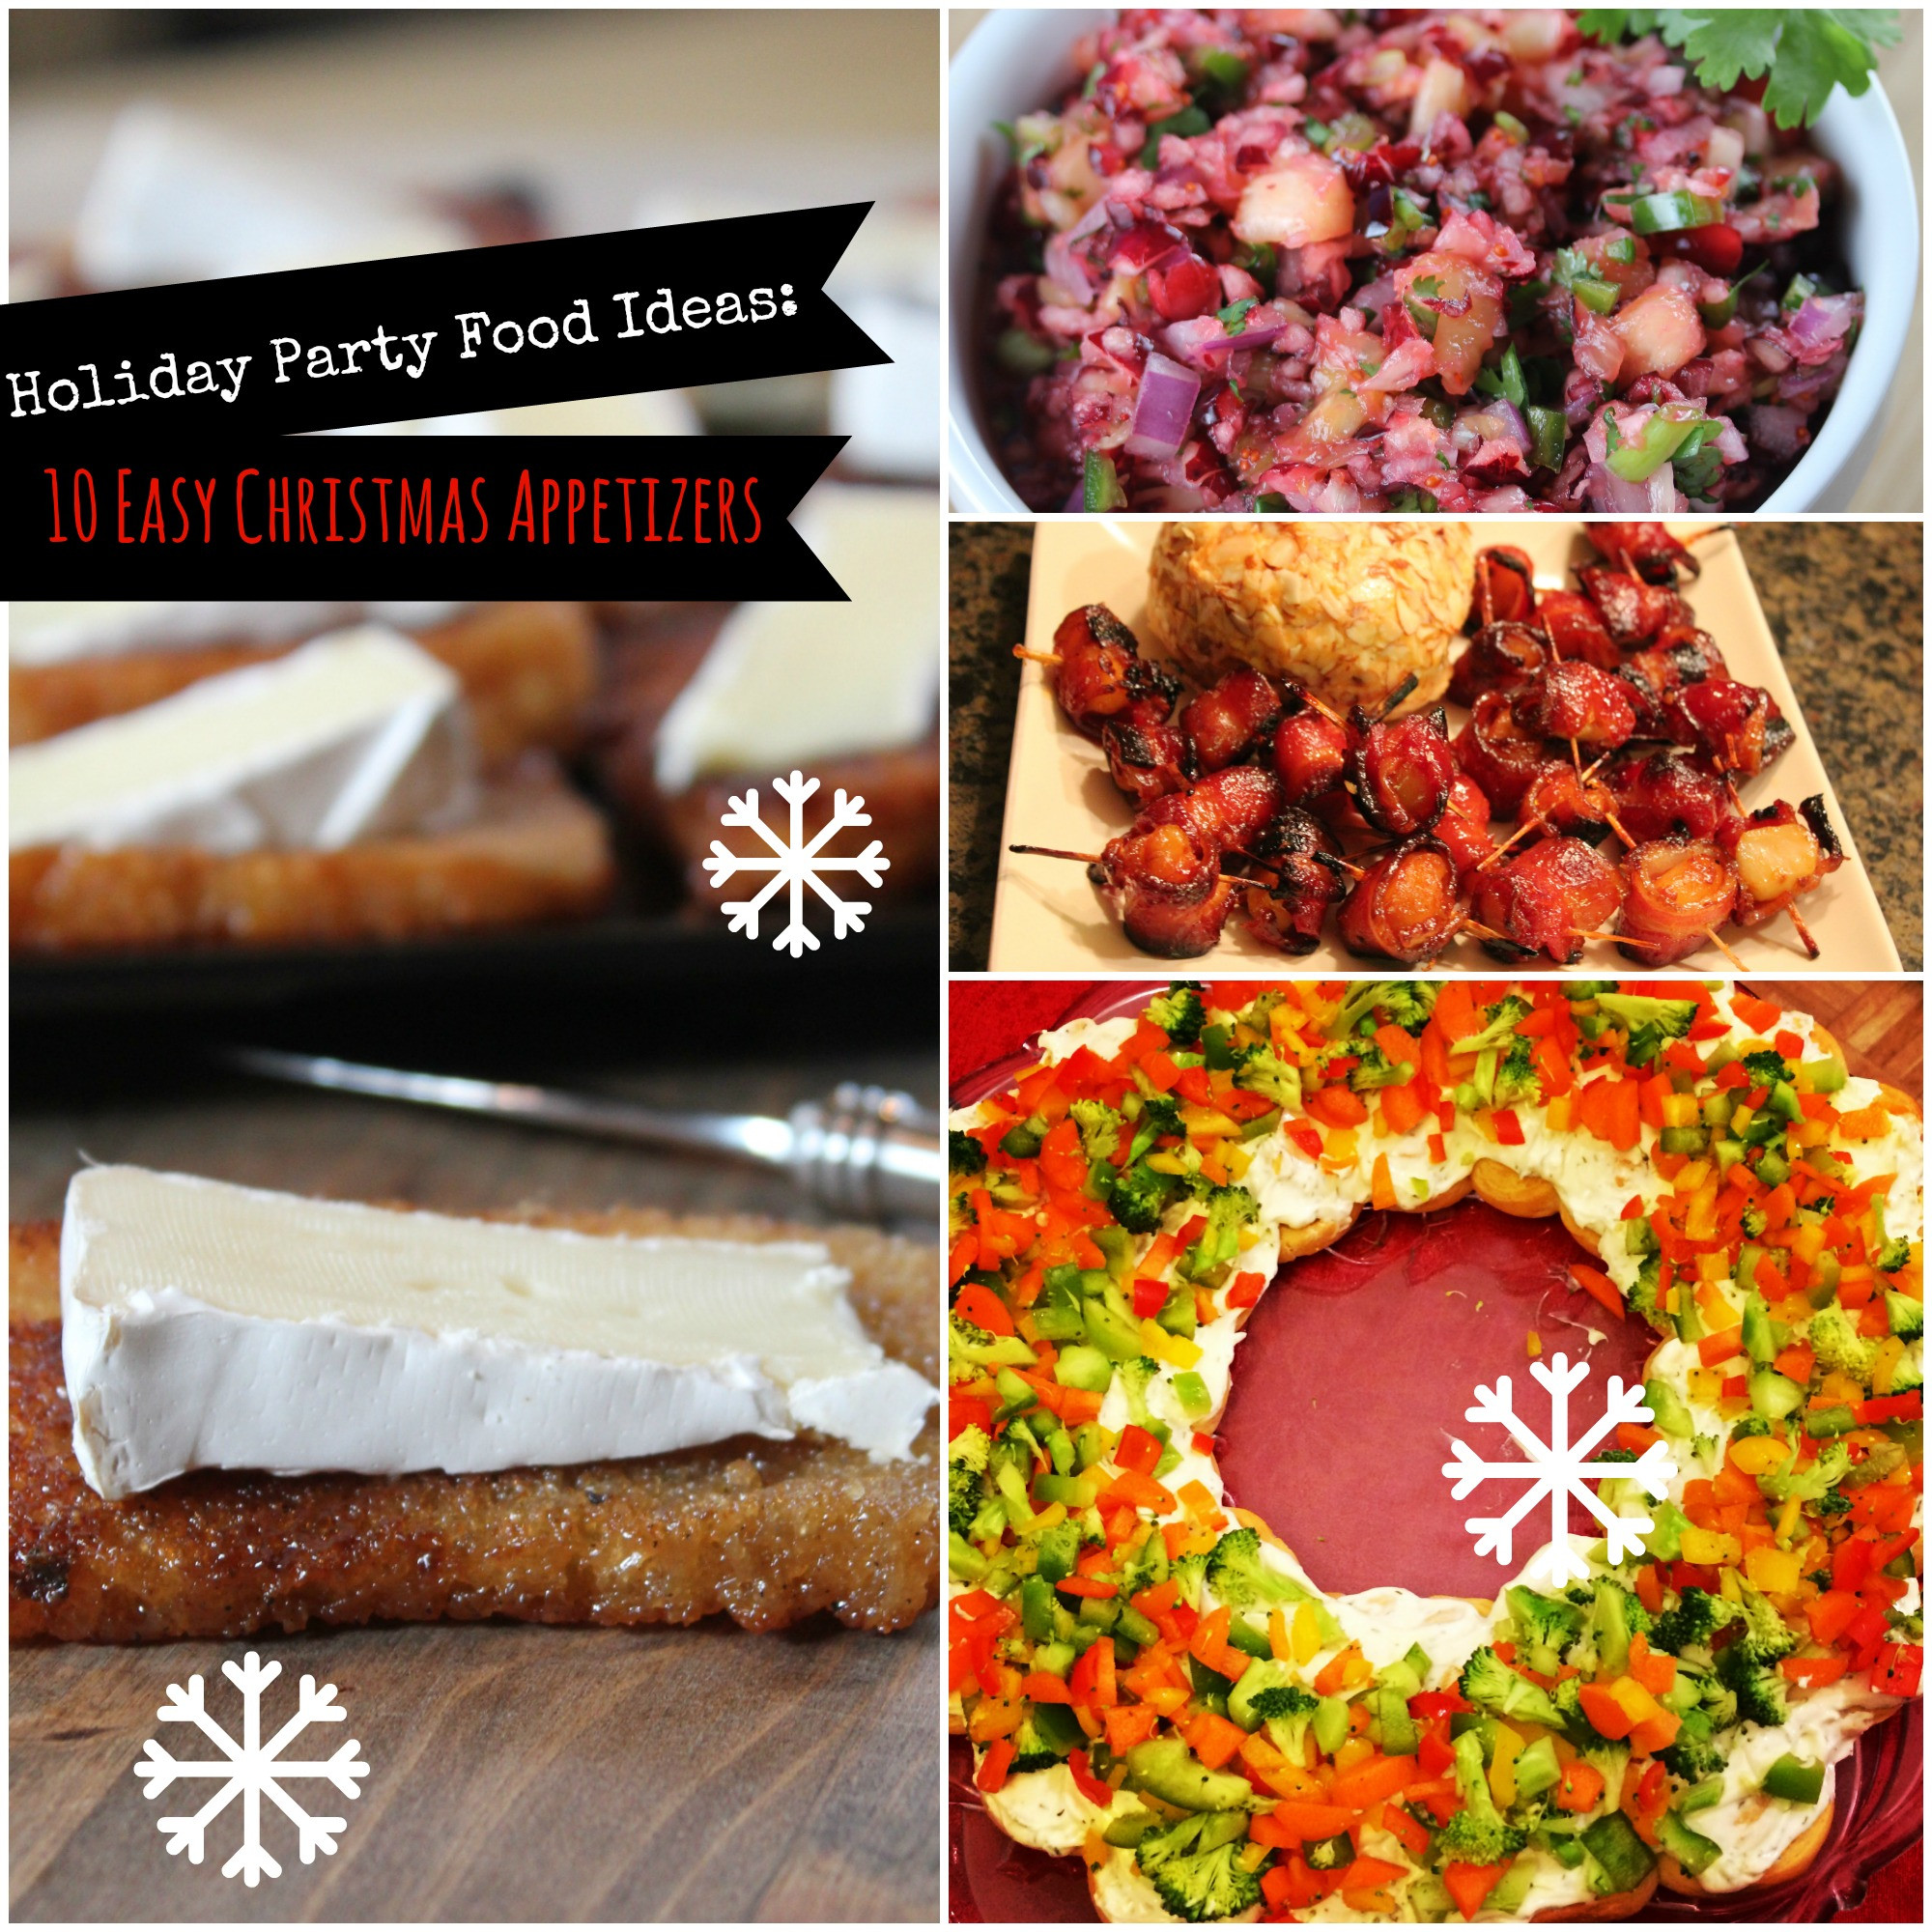 Holiday Party Snack Ideas
 Holiday Party Food Ideas 10 Easy Christmas Appetizers